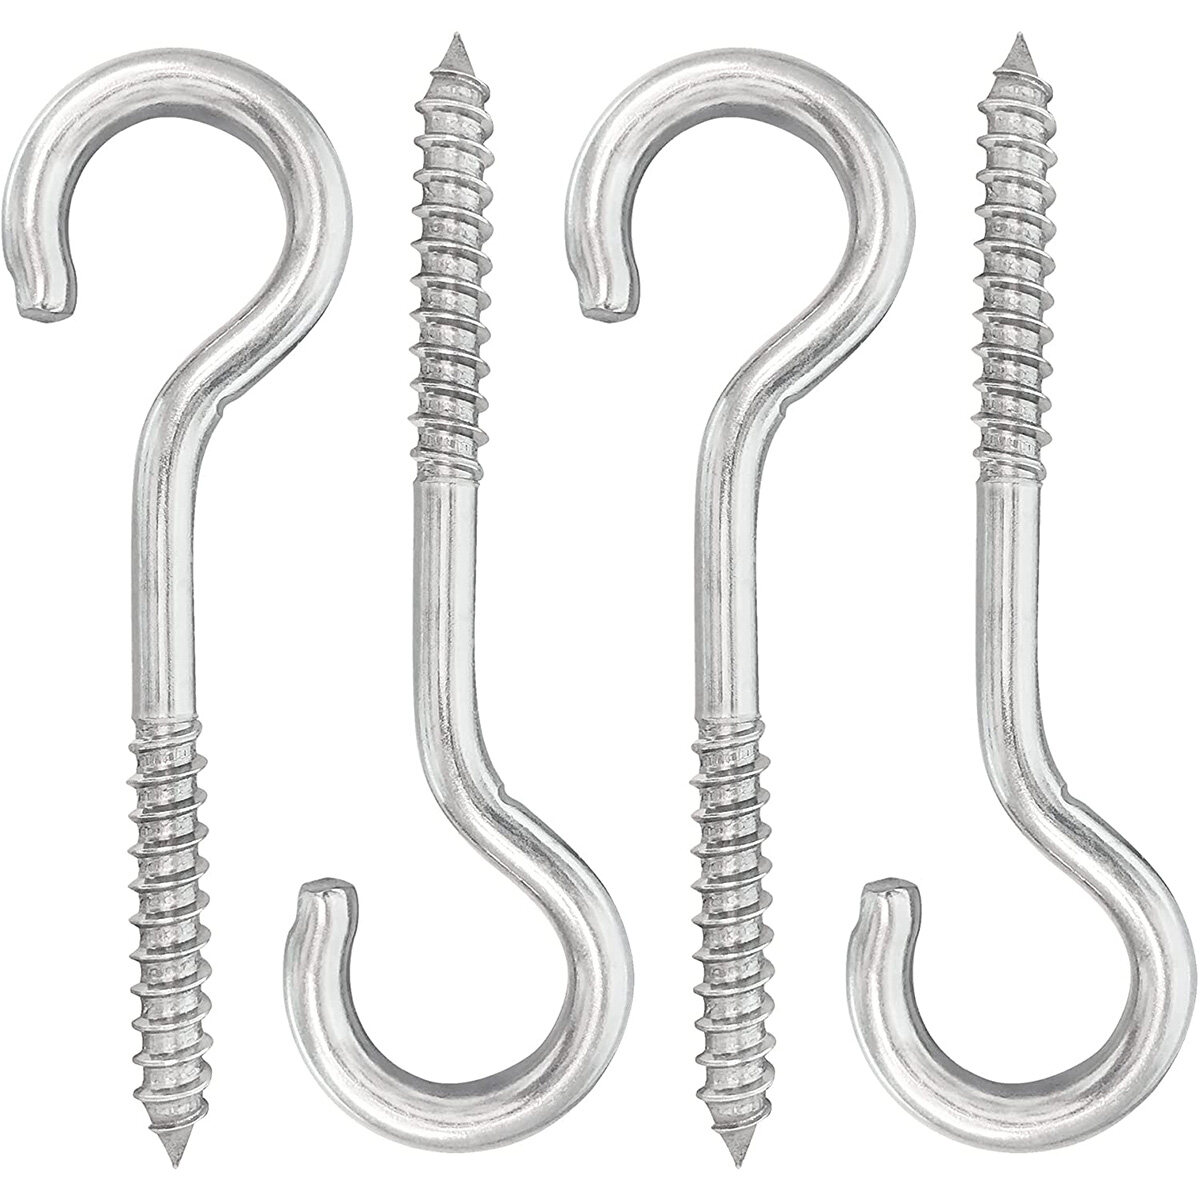 5 inch 4-Pack 304 Stainless Steel Heavy-Duty Screw Eye Hook Eye Bolts,  Hammock, Awning, Hanging Chair, Hanging Basket (4-Pack)